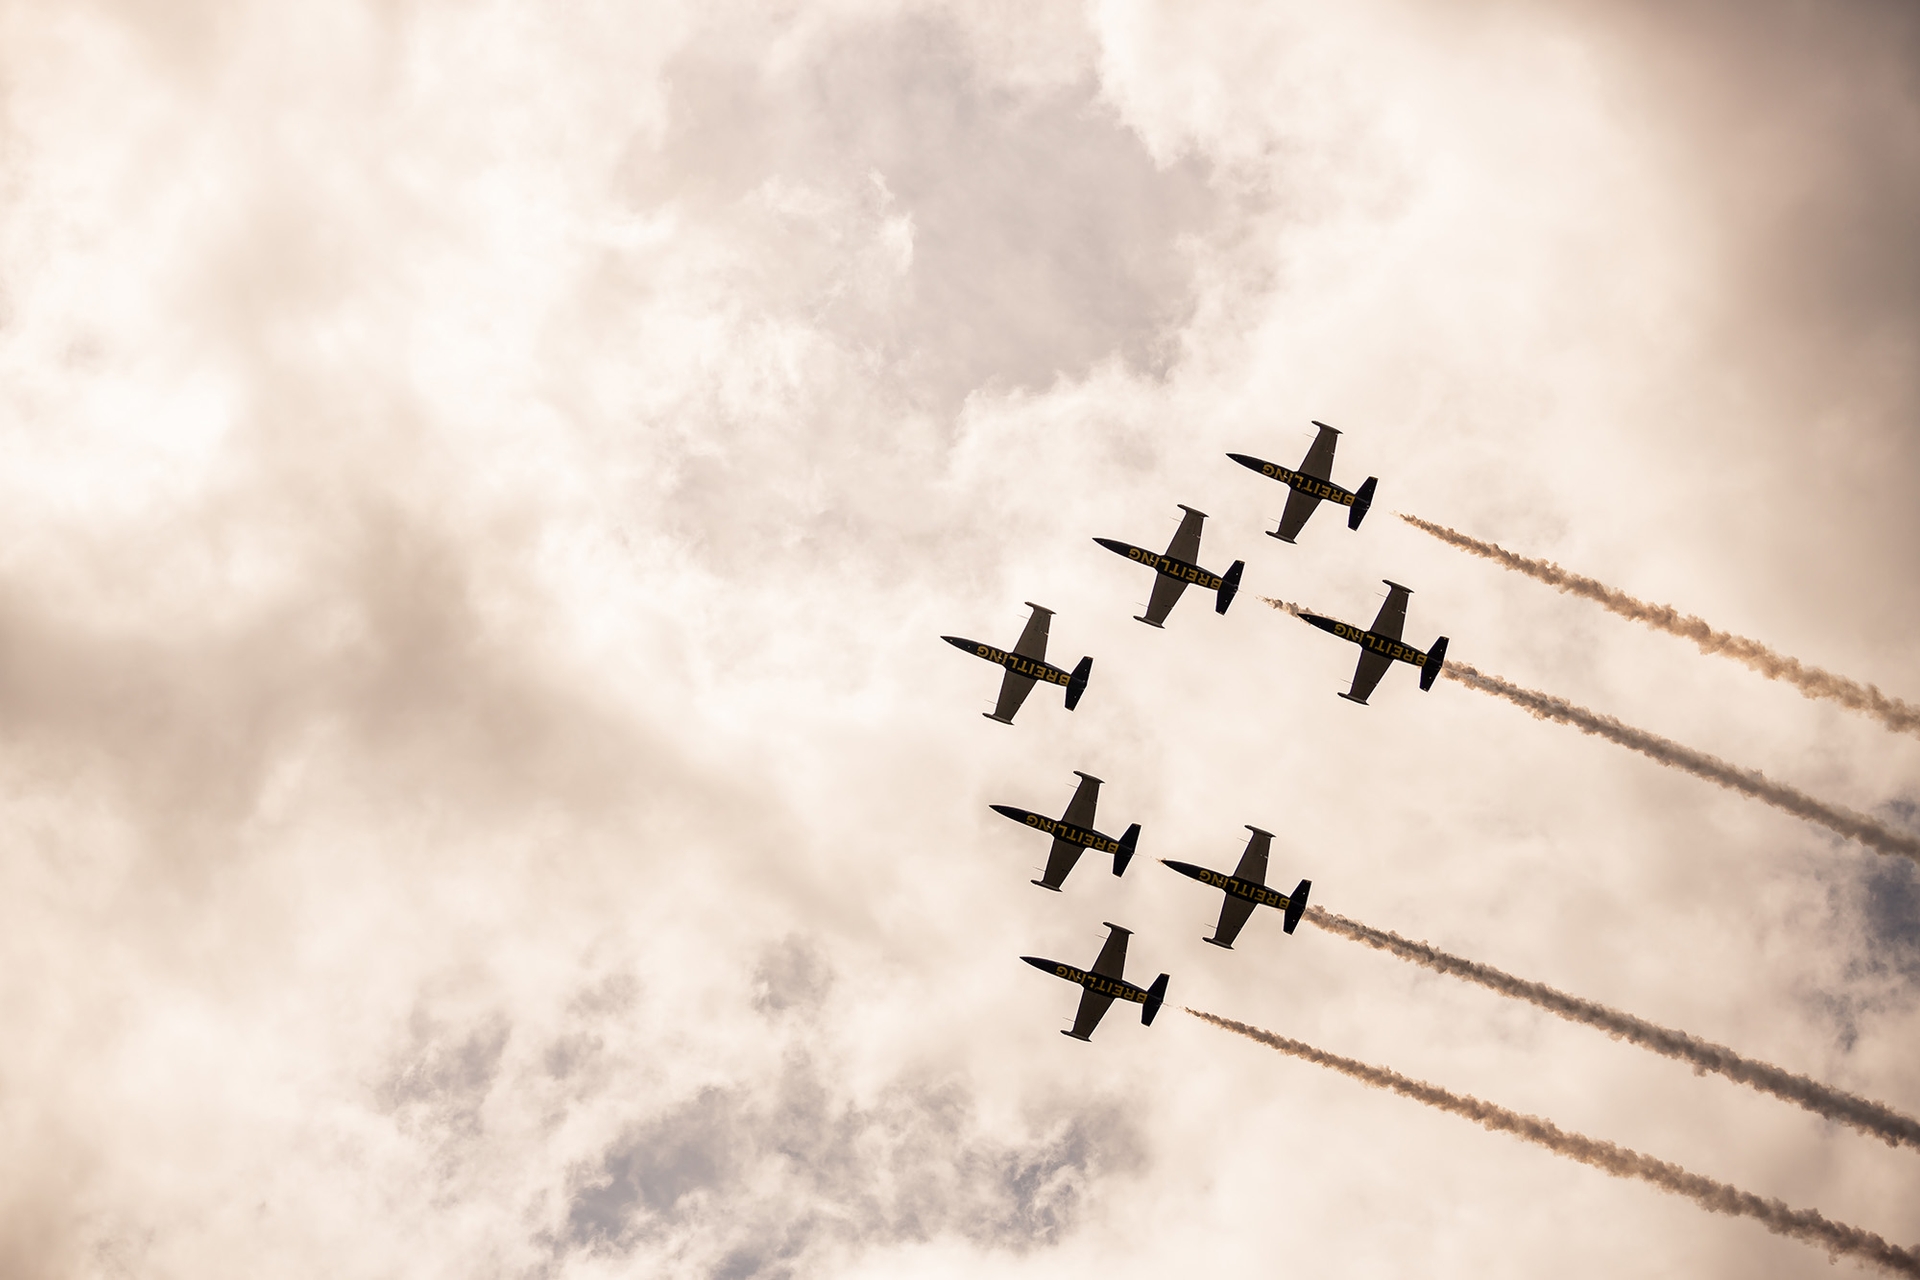 Breitling jets from below